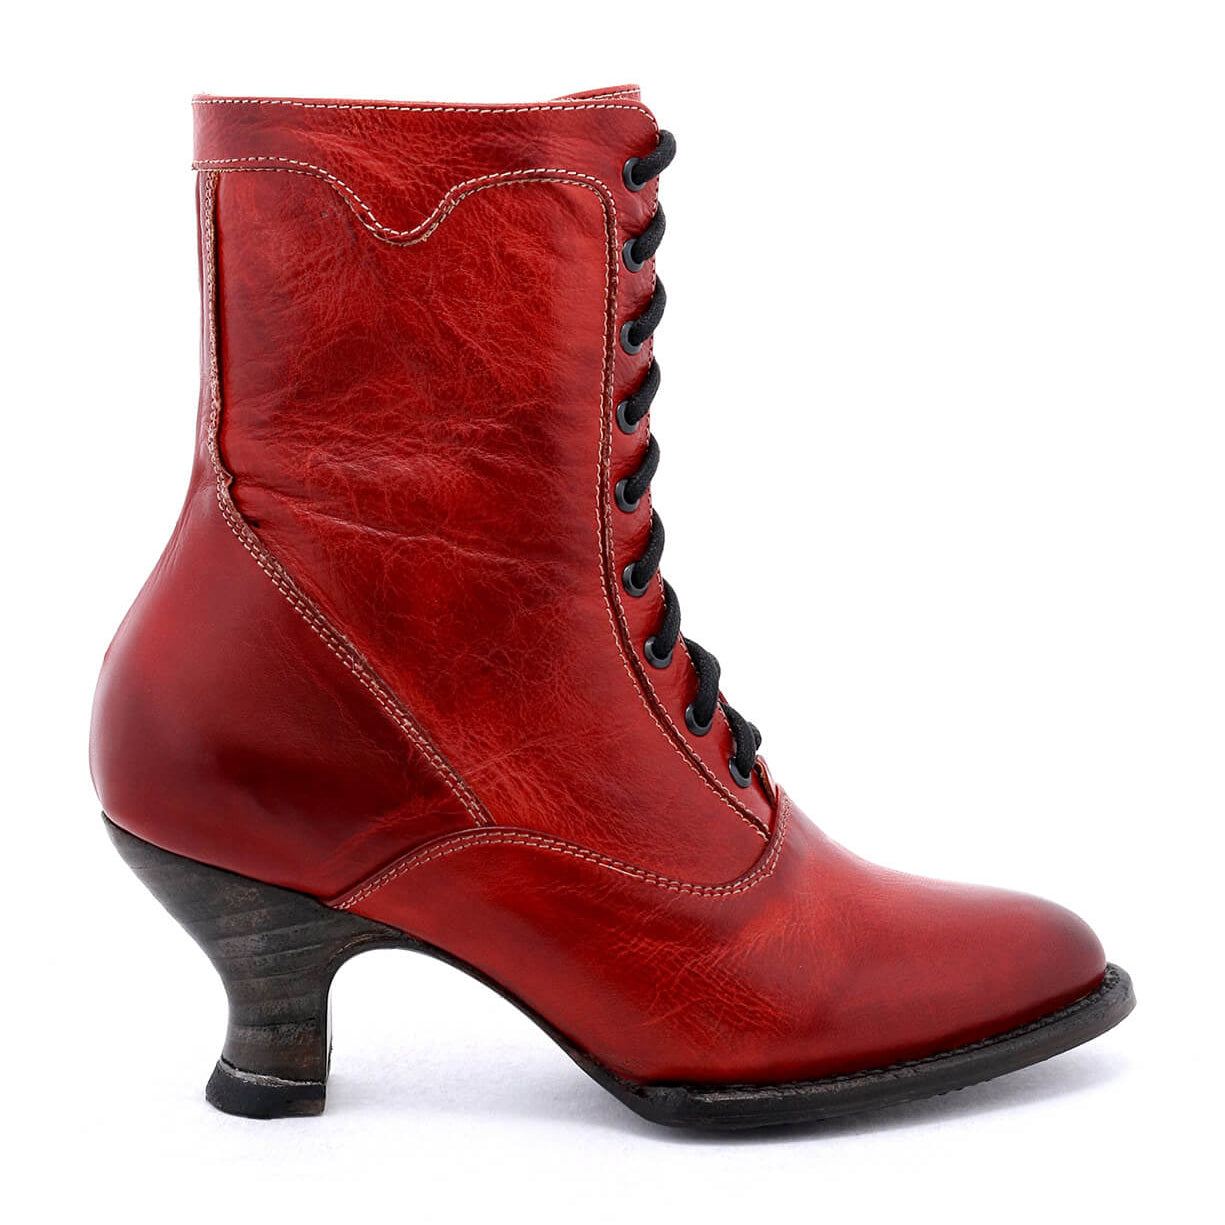 An uncompromising quality women's red leather ankle boot, the Eleanor by Oak Tree Farms, with a hand-dyed finish, showcased against a white background.